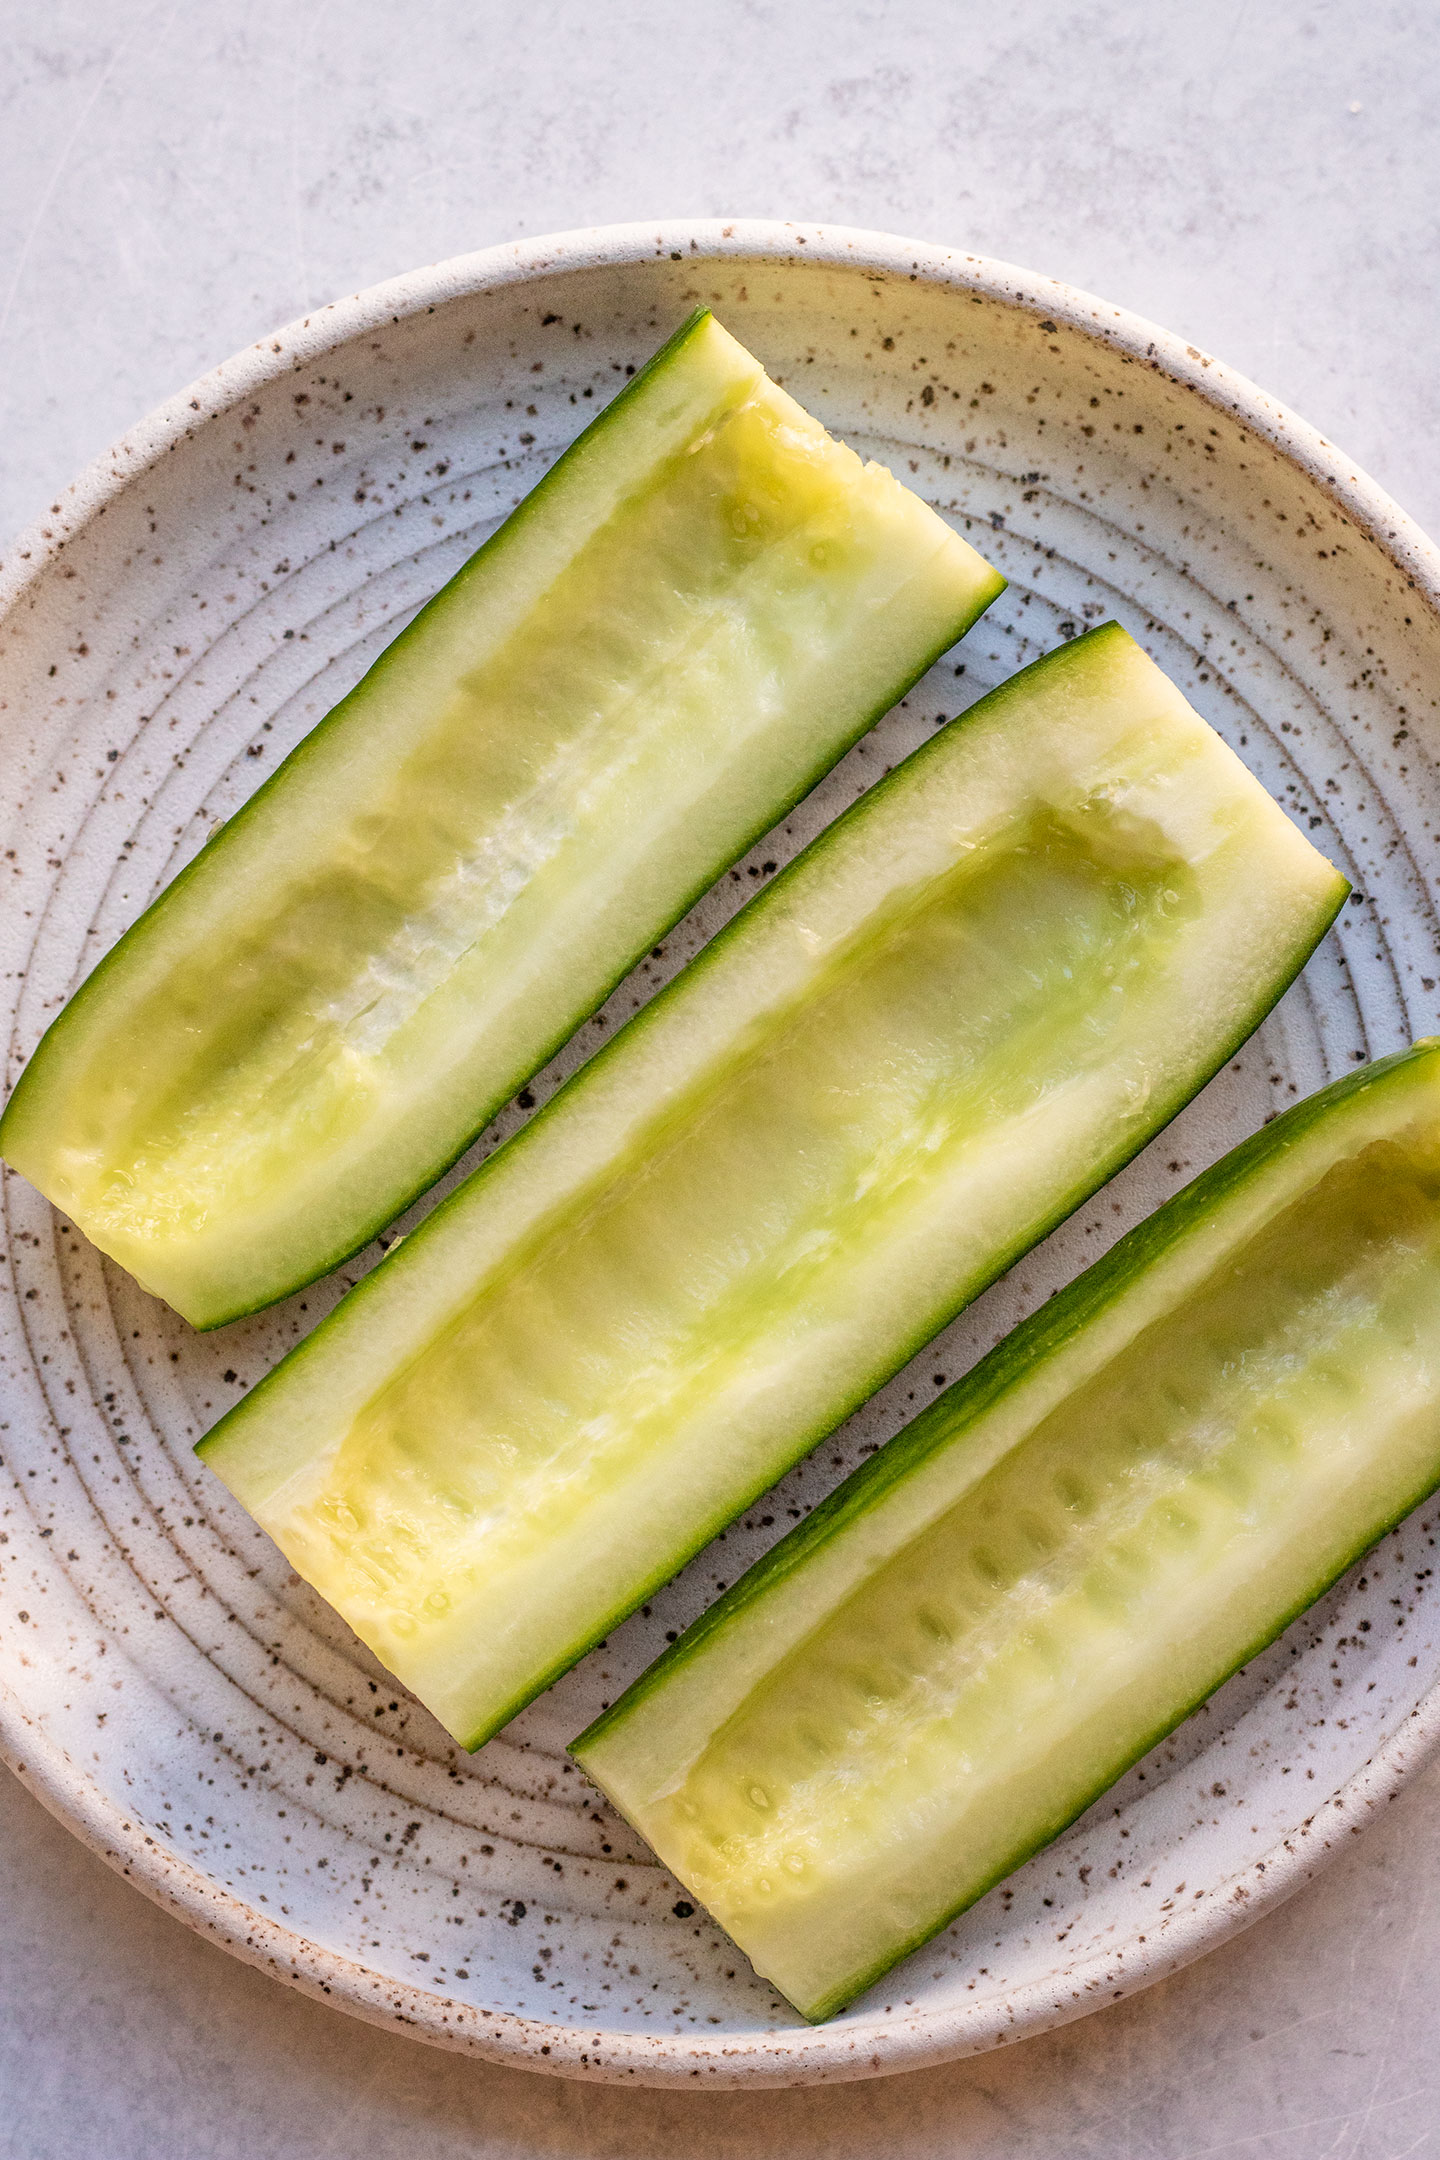 Deseeded cucumbers on a plate.